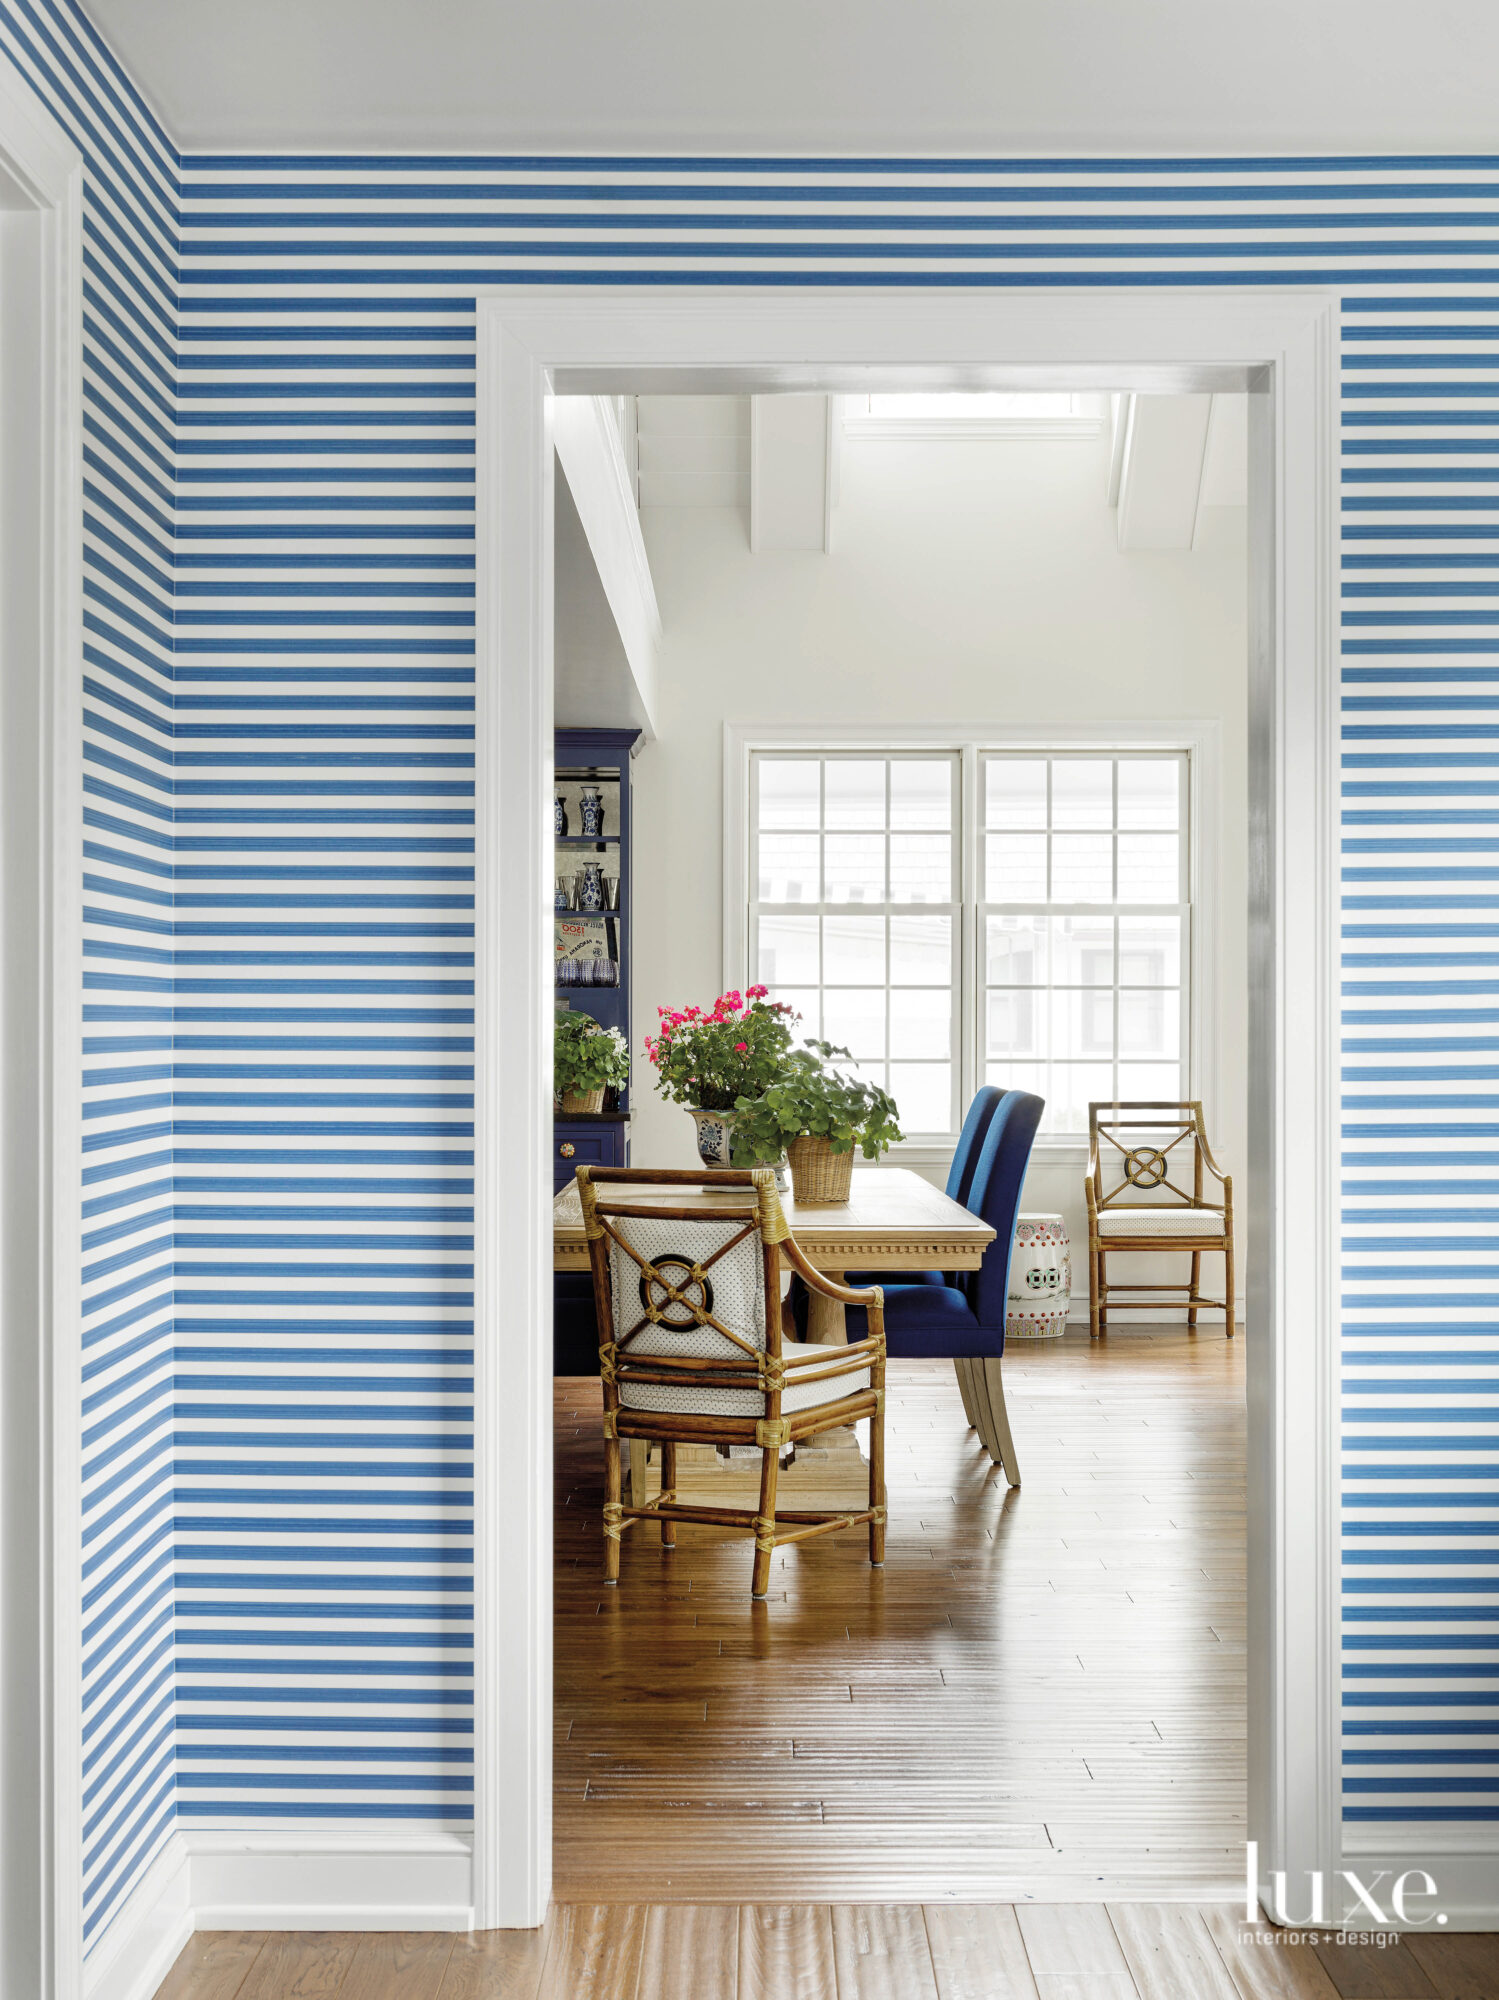 The hallway that looks into the kitchen has blue-and-white striped wallpaper.